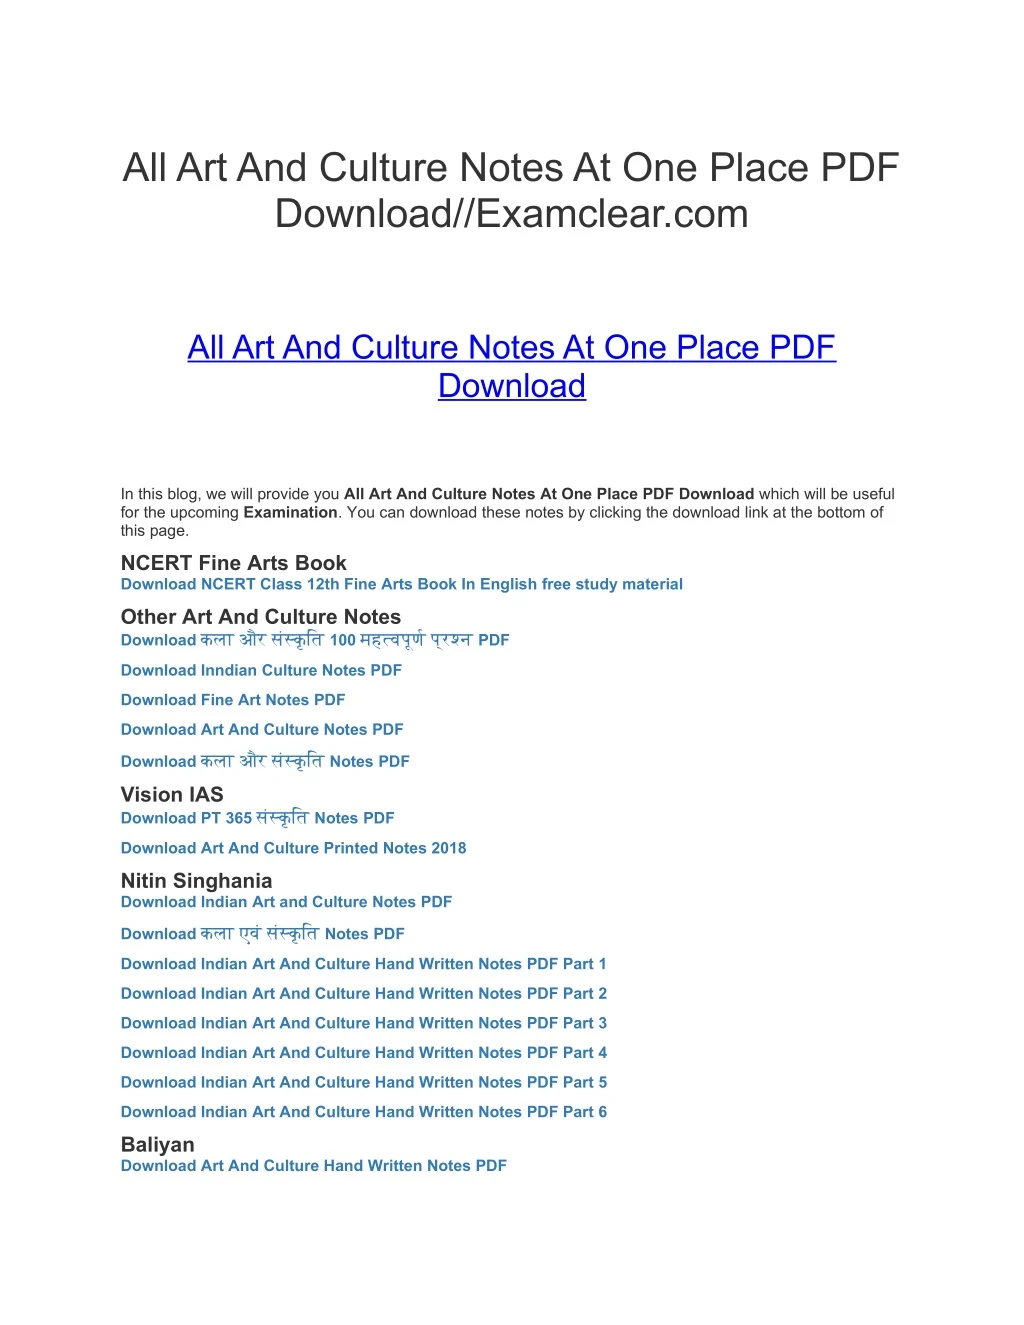 all art and culture notes at one place